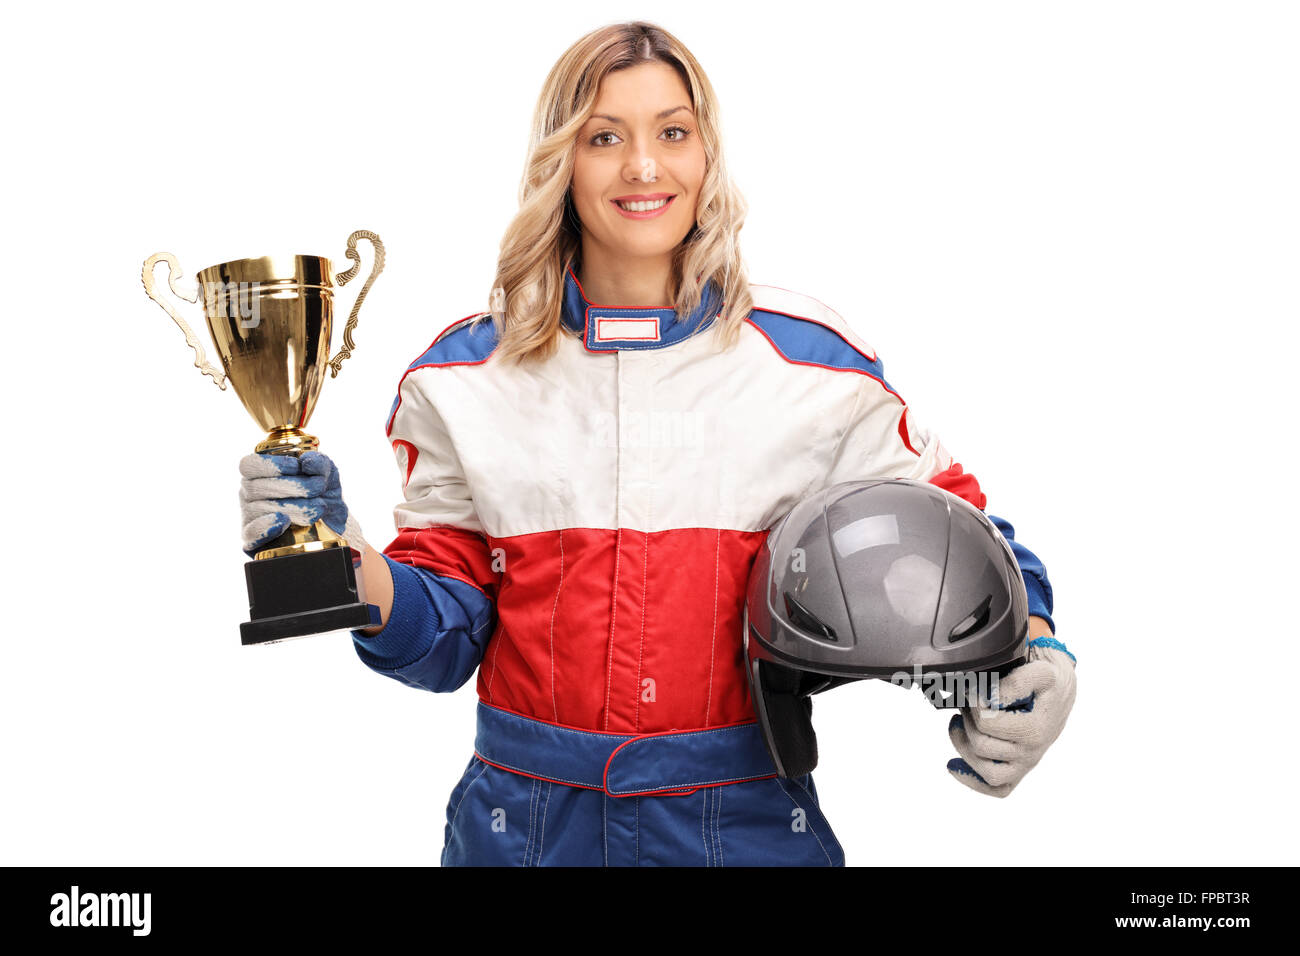 Young female car racing champion holding a gold trophy and looking at the camera isolated on white background Stock Photo